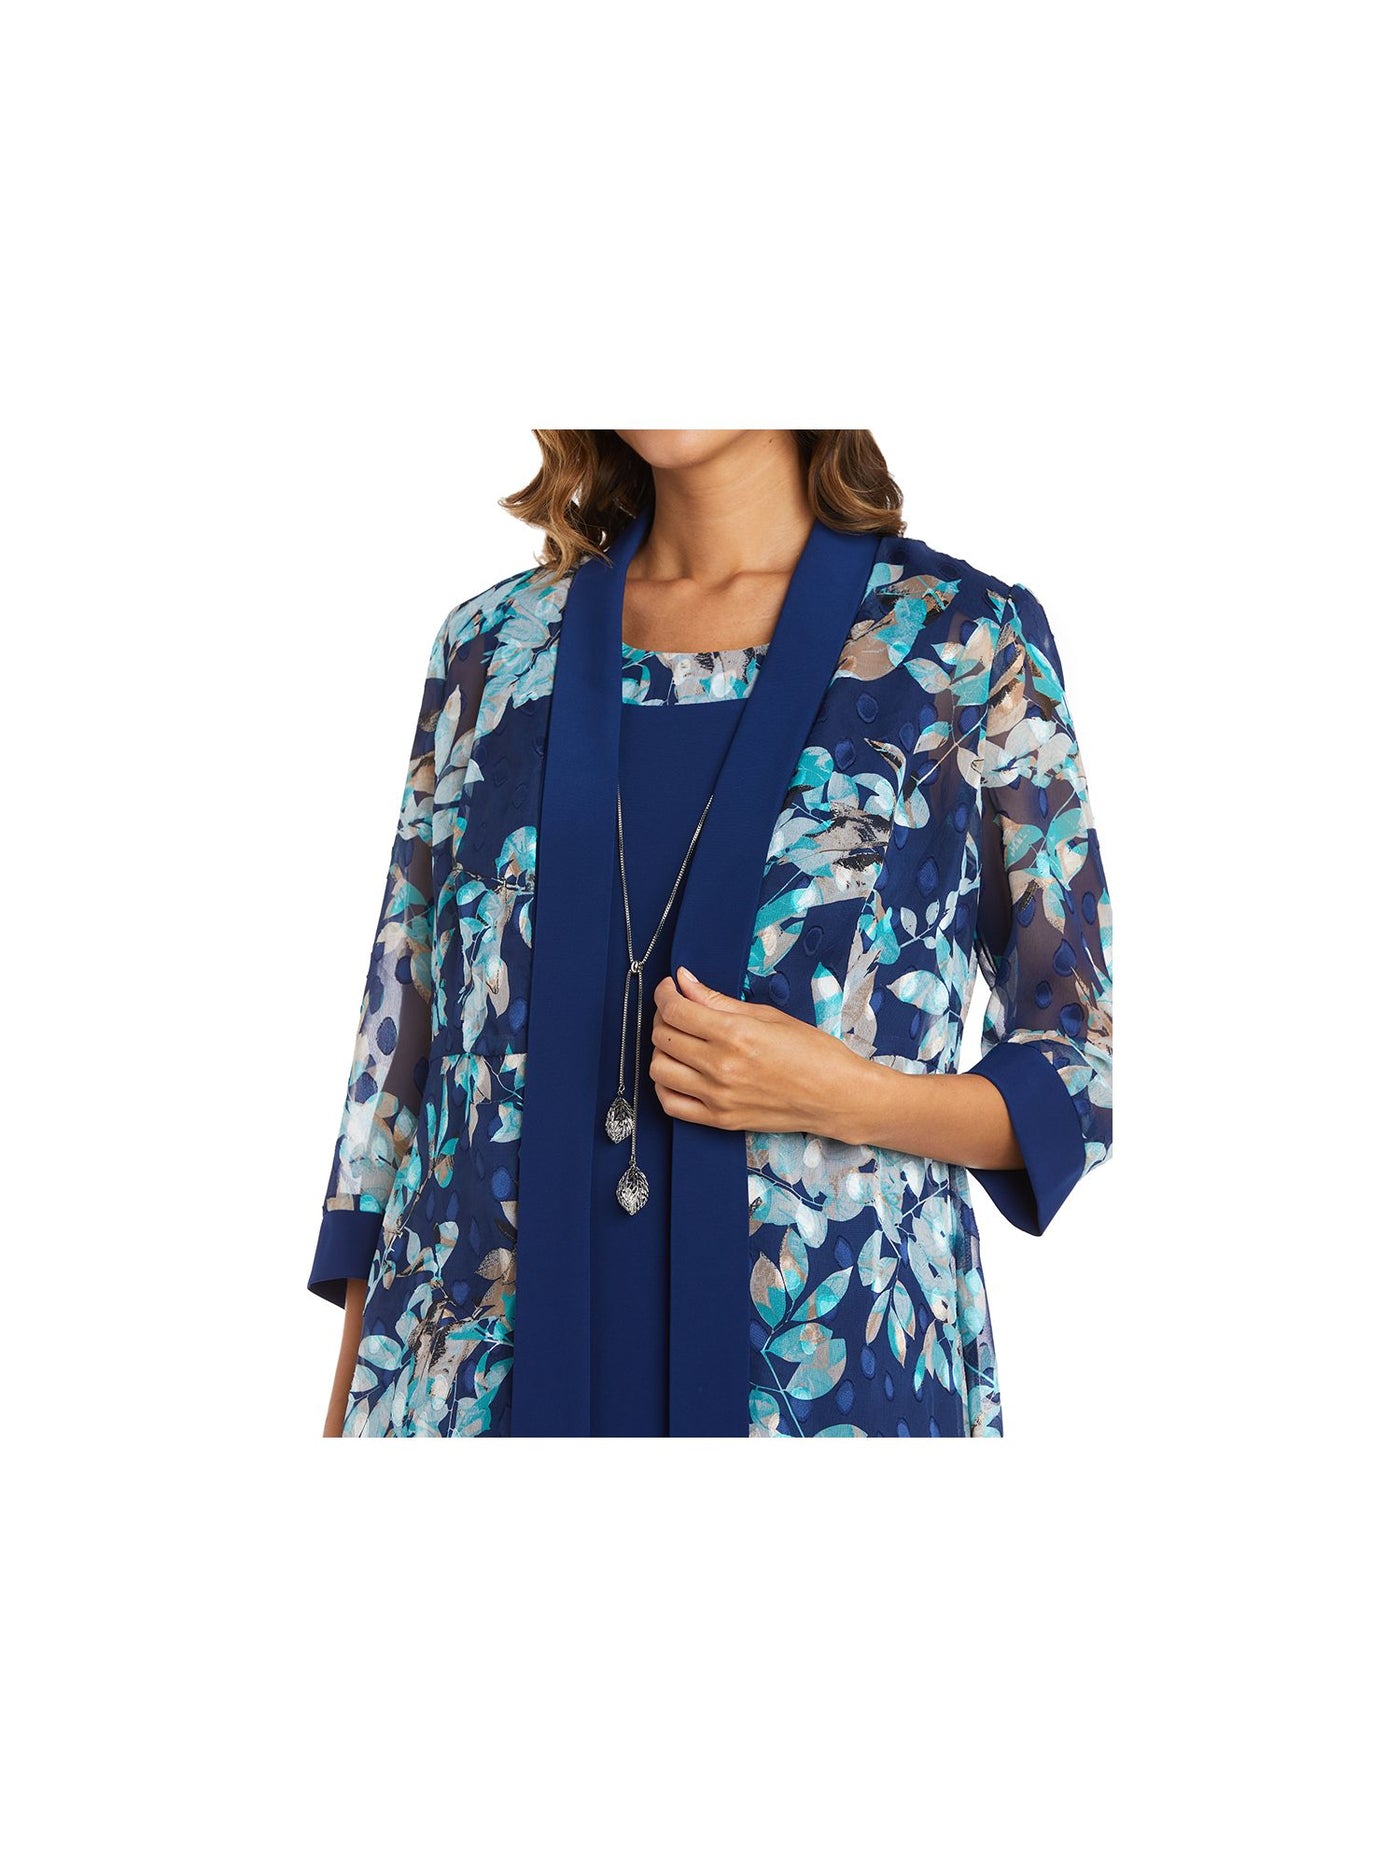 R&M RICHARDS WOMAN Womens Navy Sheer Floral 3/4 Sleeve Open Front Cardigan Plus 16W